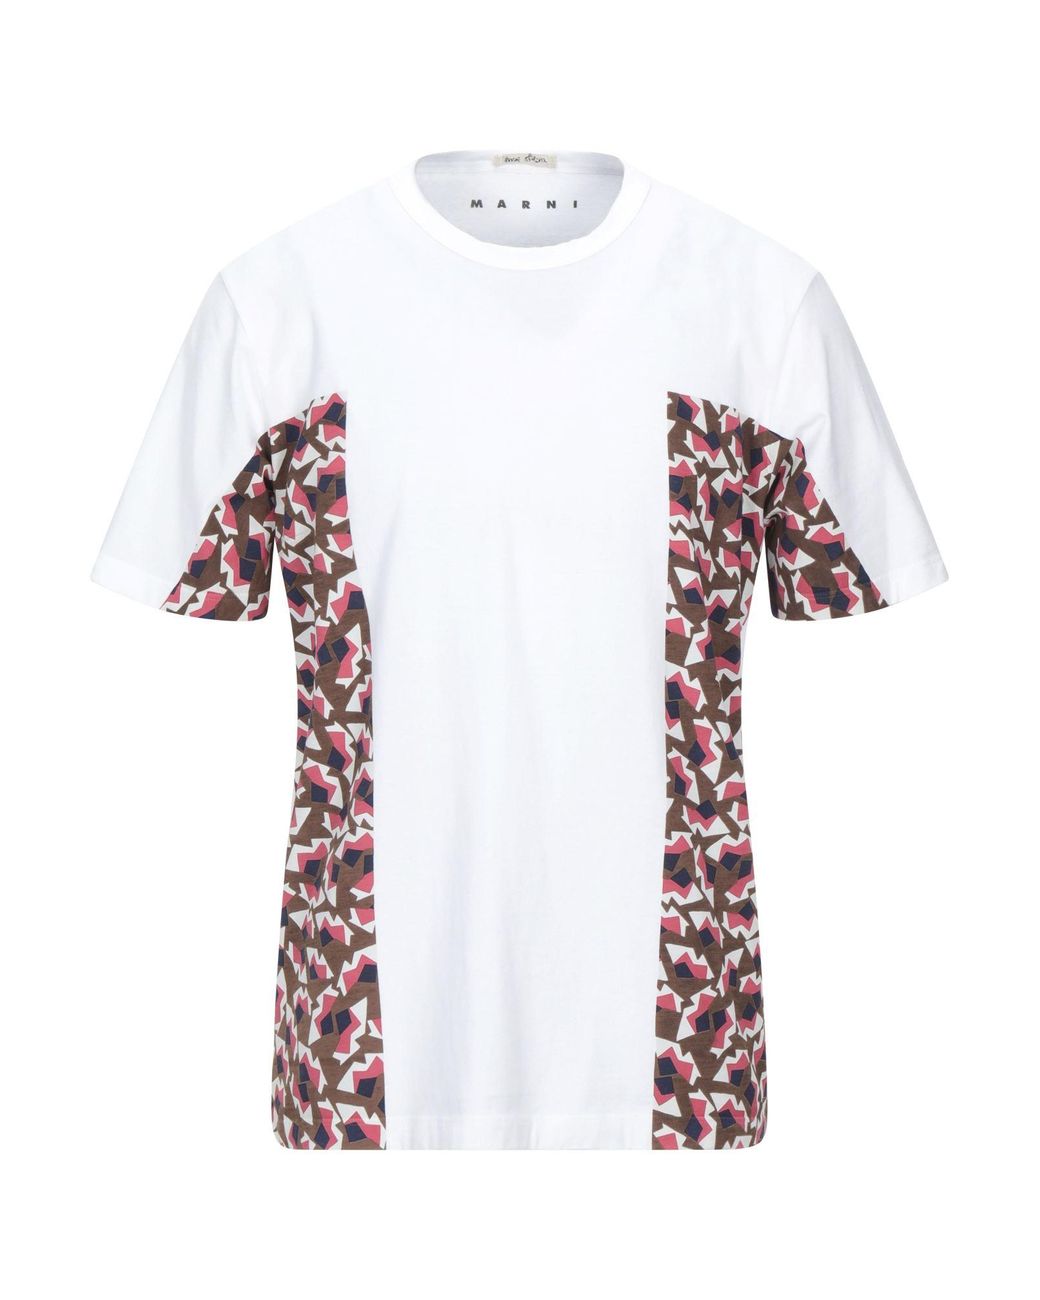 Marni Cotton T-shirt in White for Men - Lyst